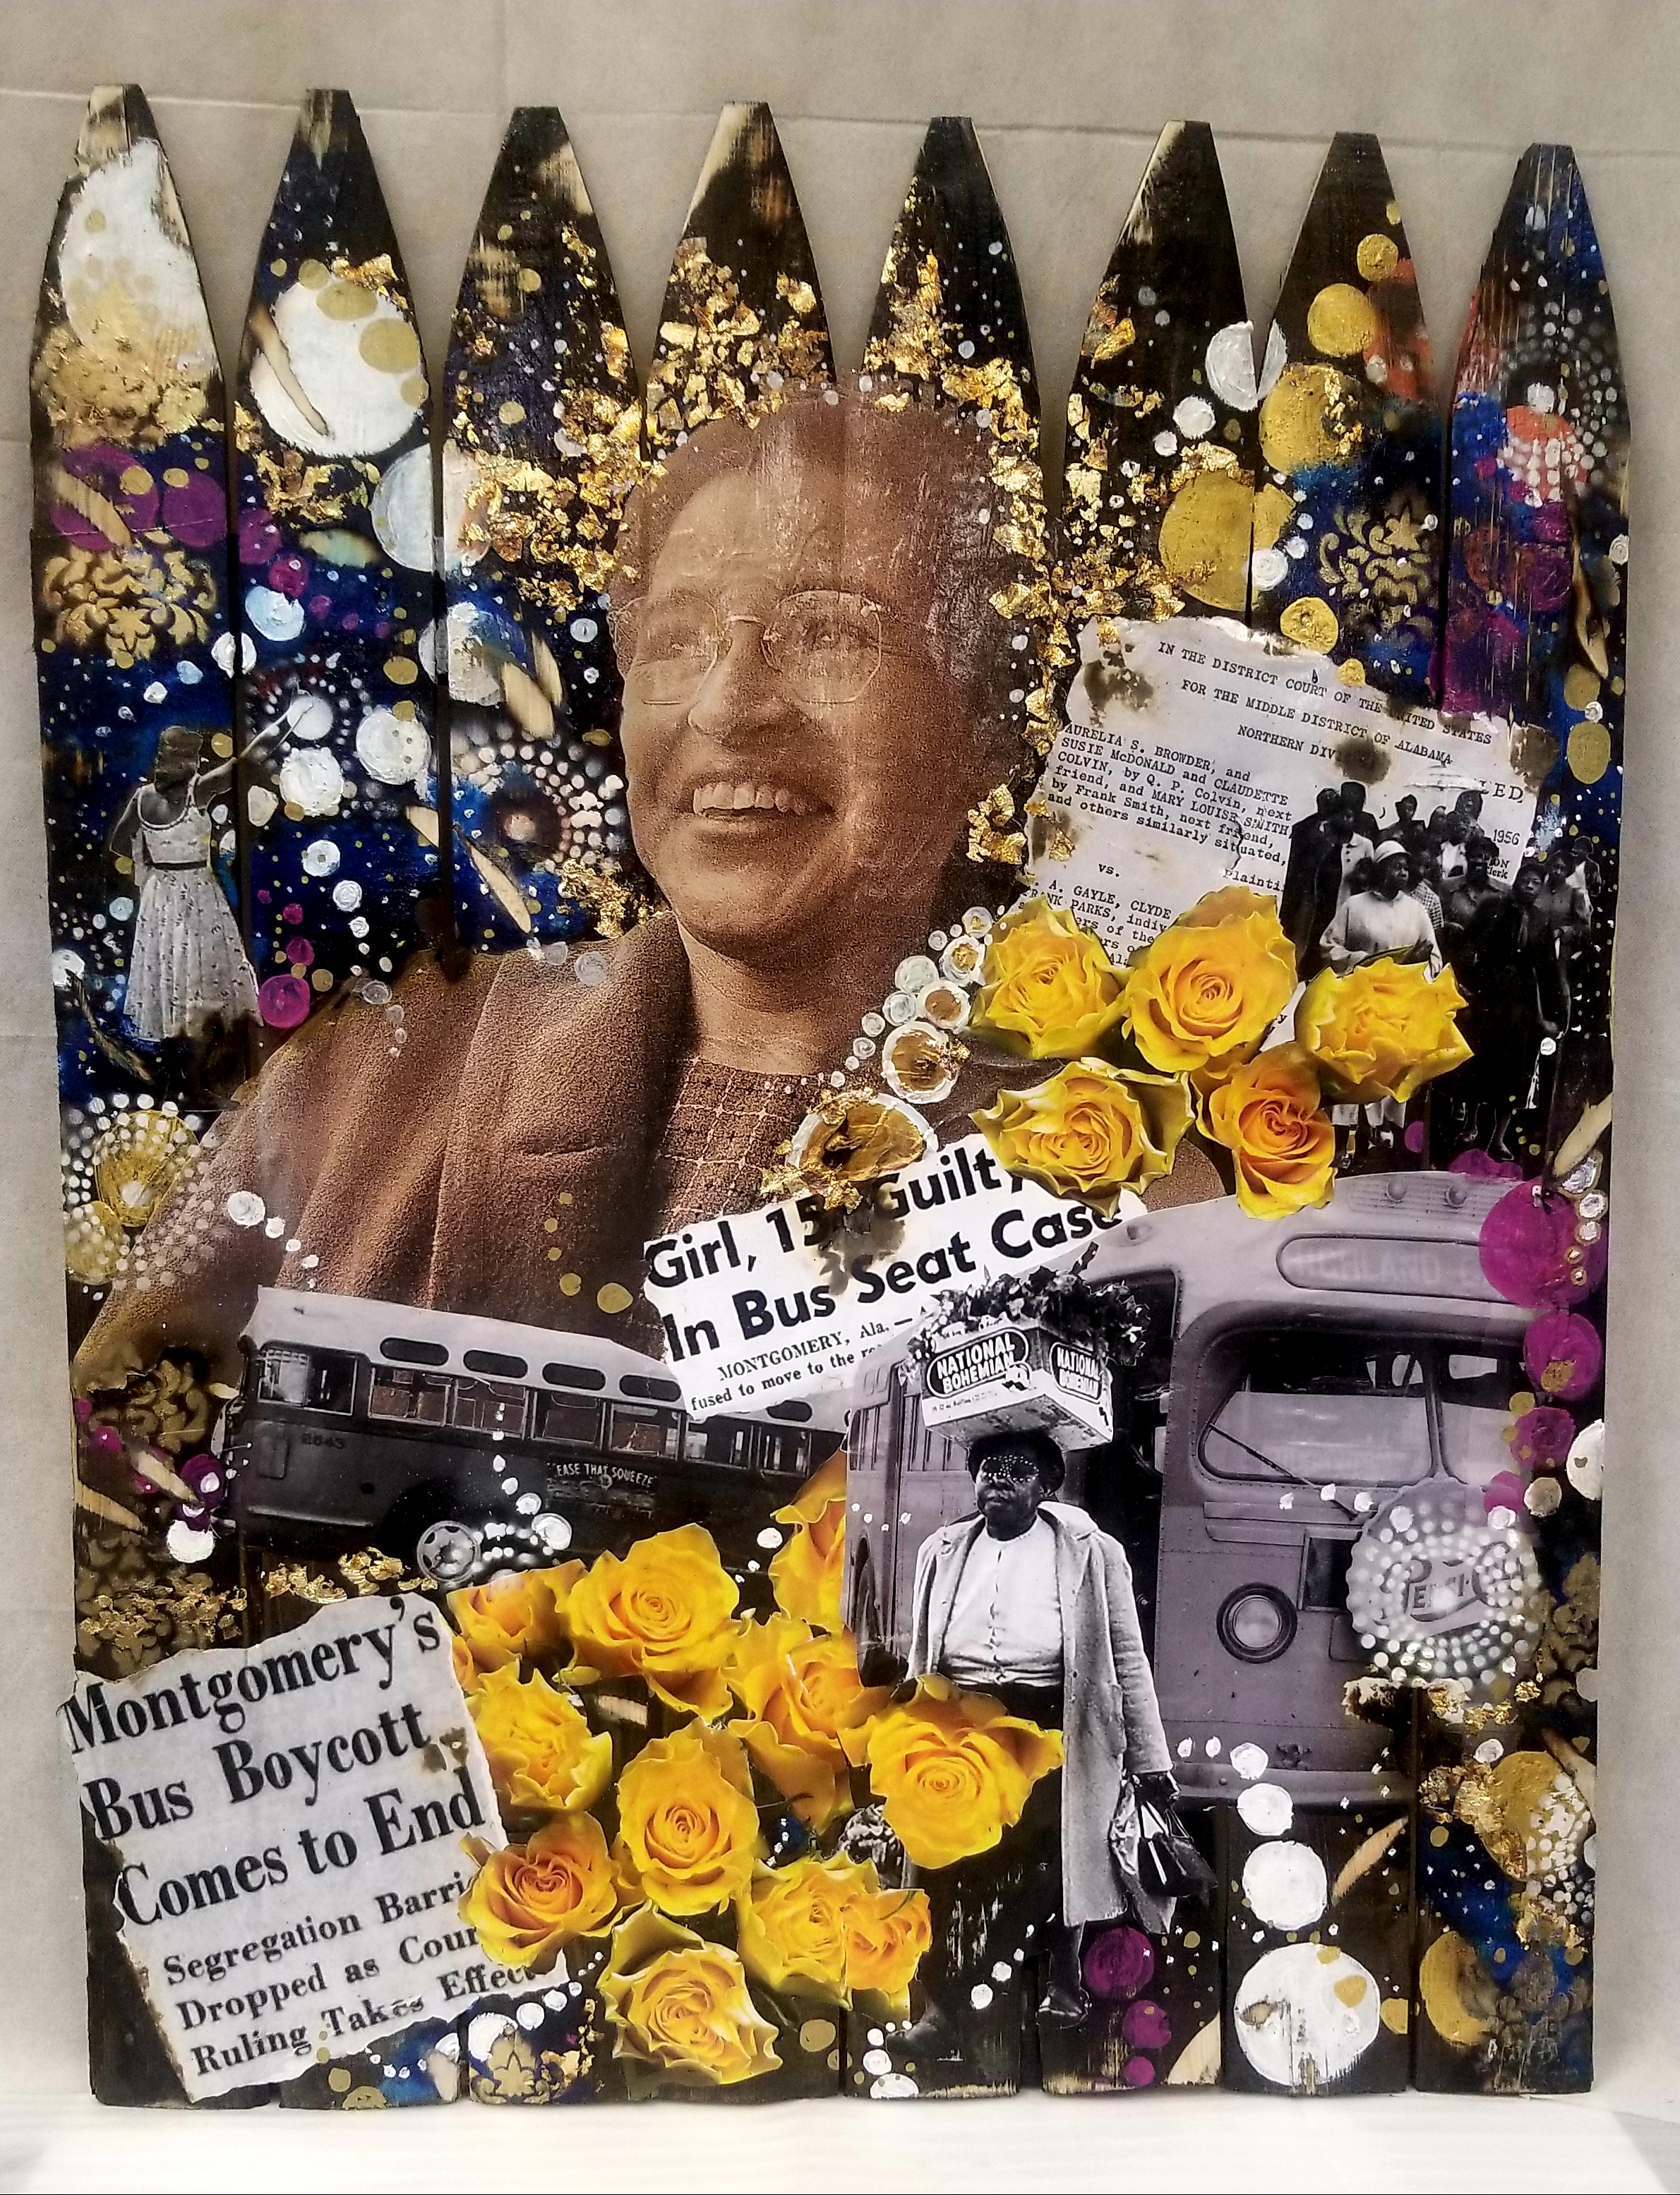 A collage featuring Rosa Parks, flowers, newspaper clipping related to the Montgomery bus boycott.